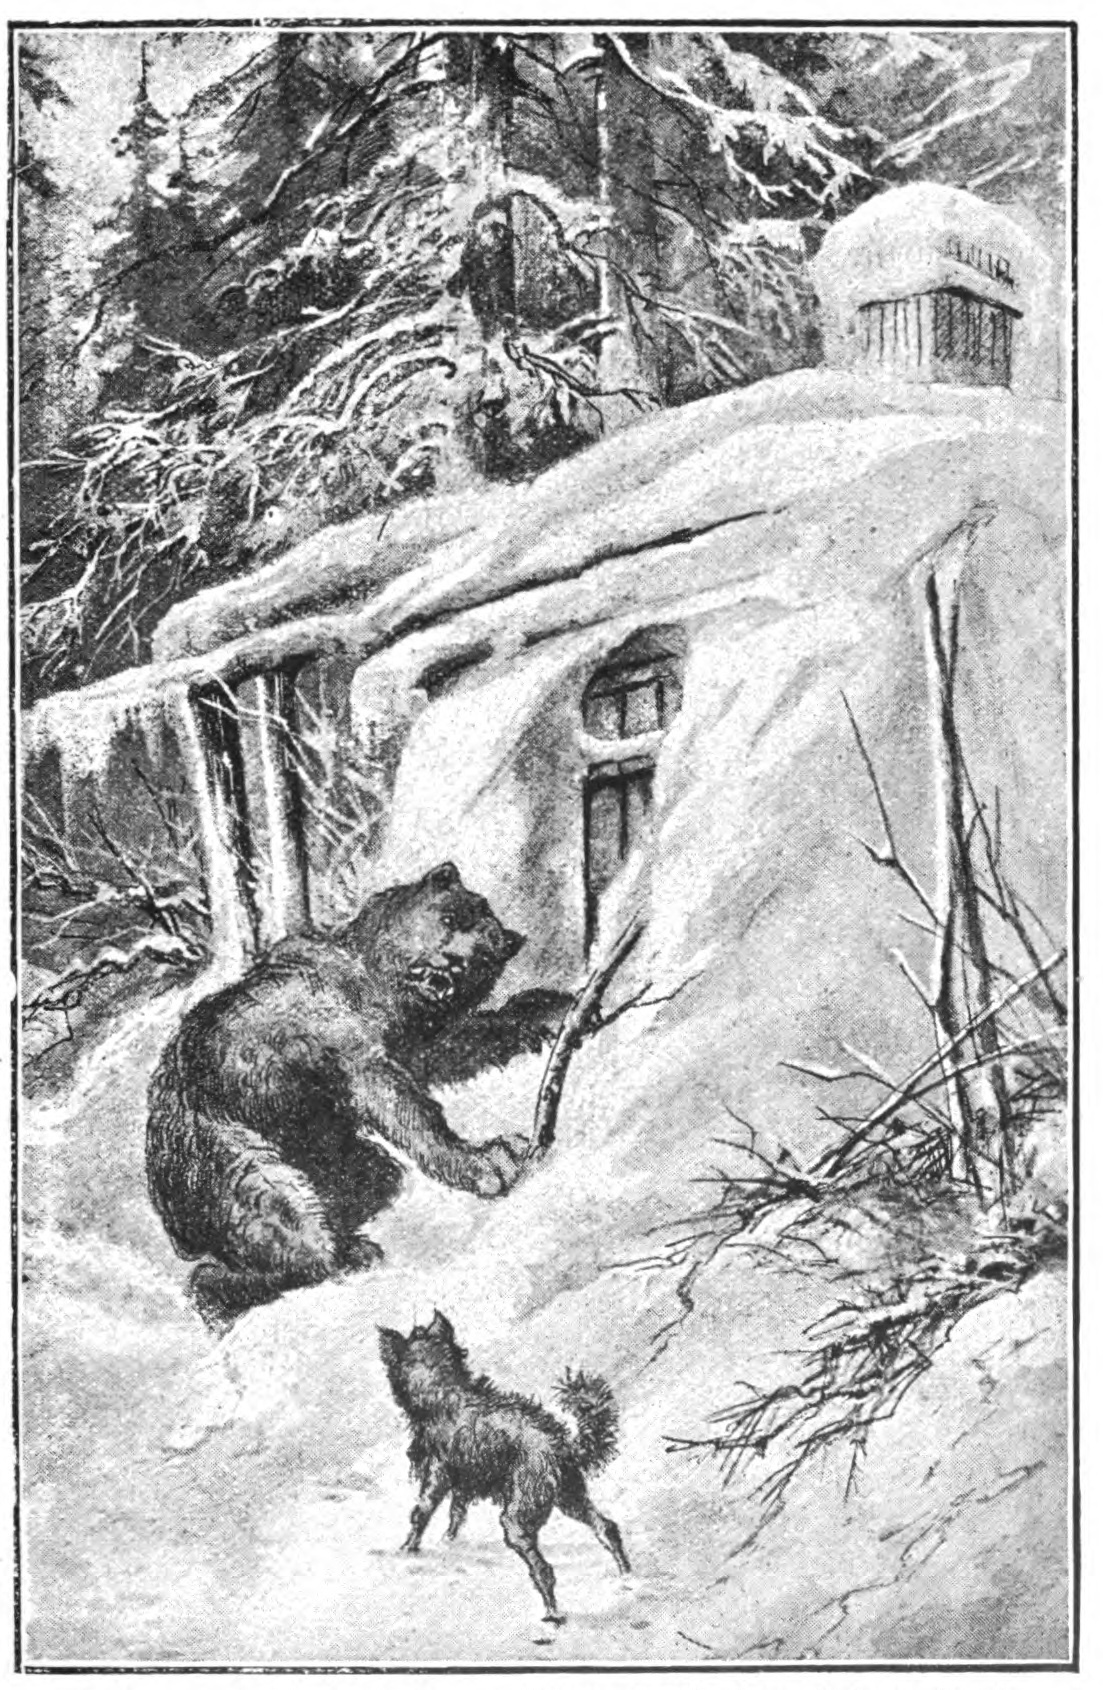 dog drawing the attention of the bear away from the hut